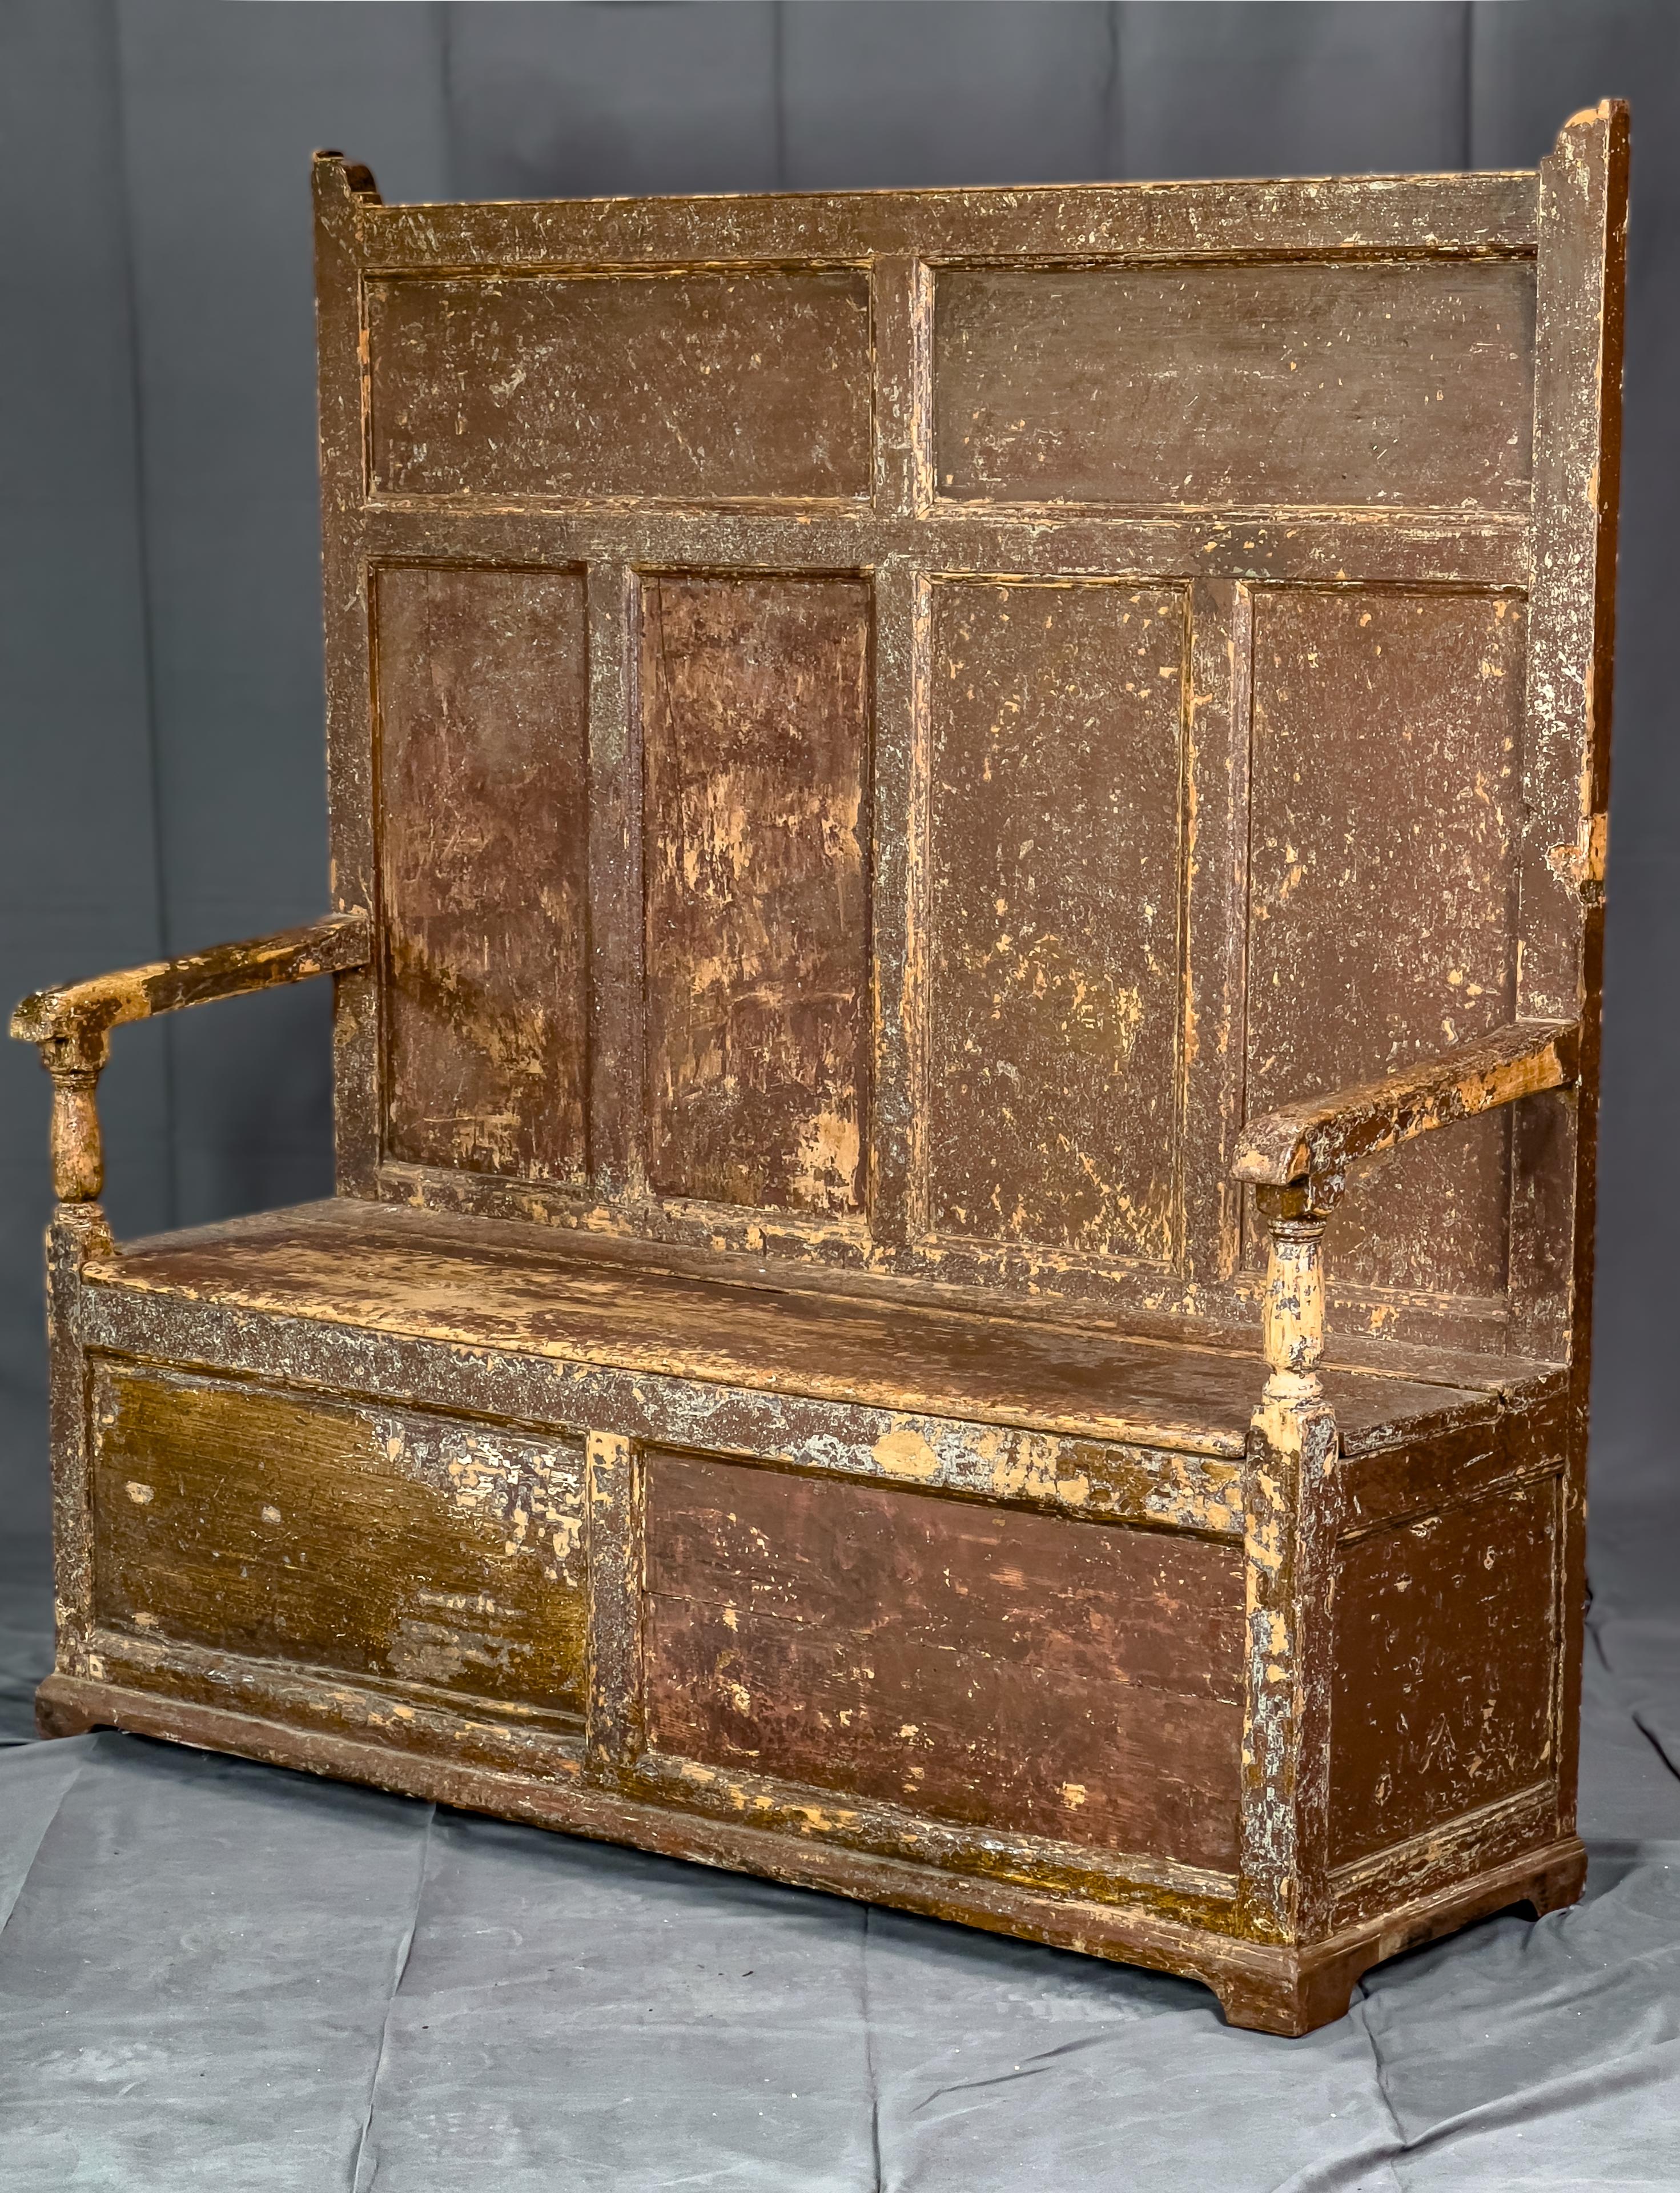 18th Century Settle bench. Originally the finish was stained like most items, and either the bench was exposed to the elements against a wall or the bench was modified to have the distressed look. In the front Paneled detail and a lift seat for